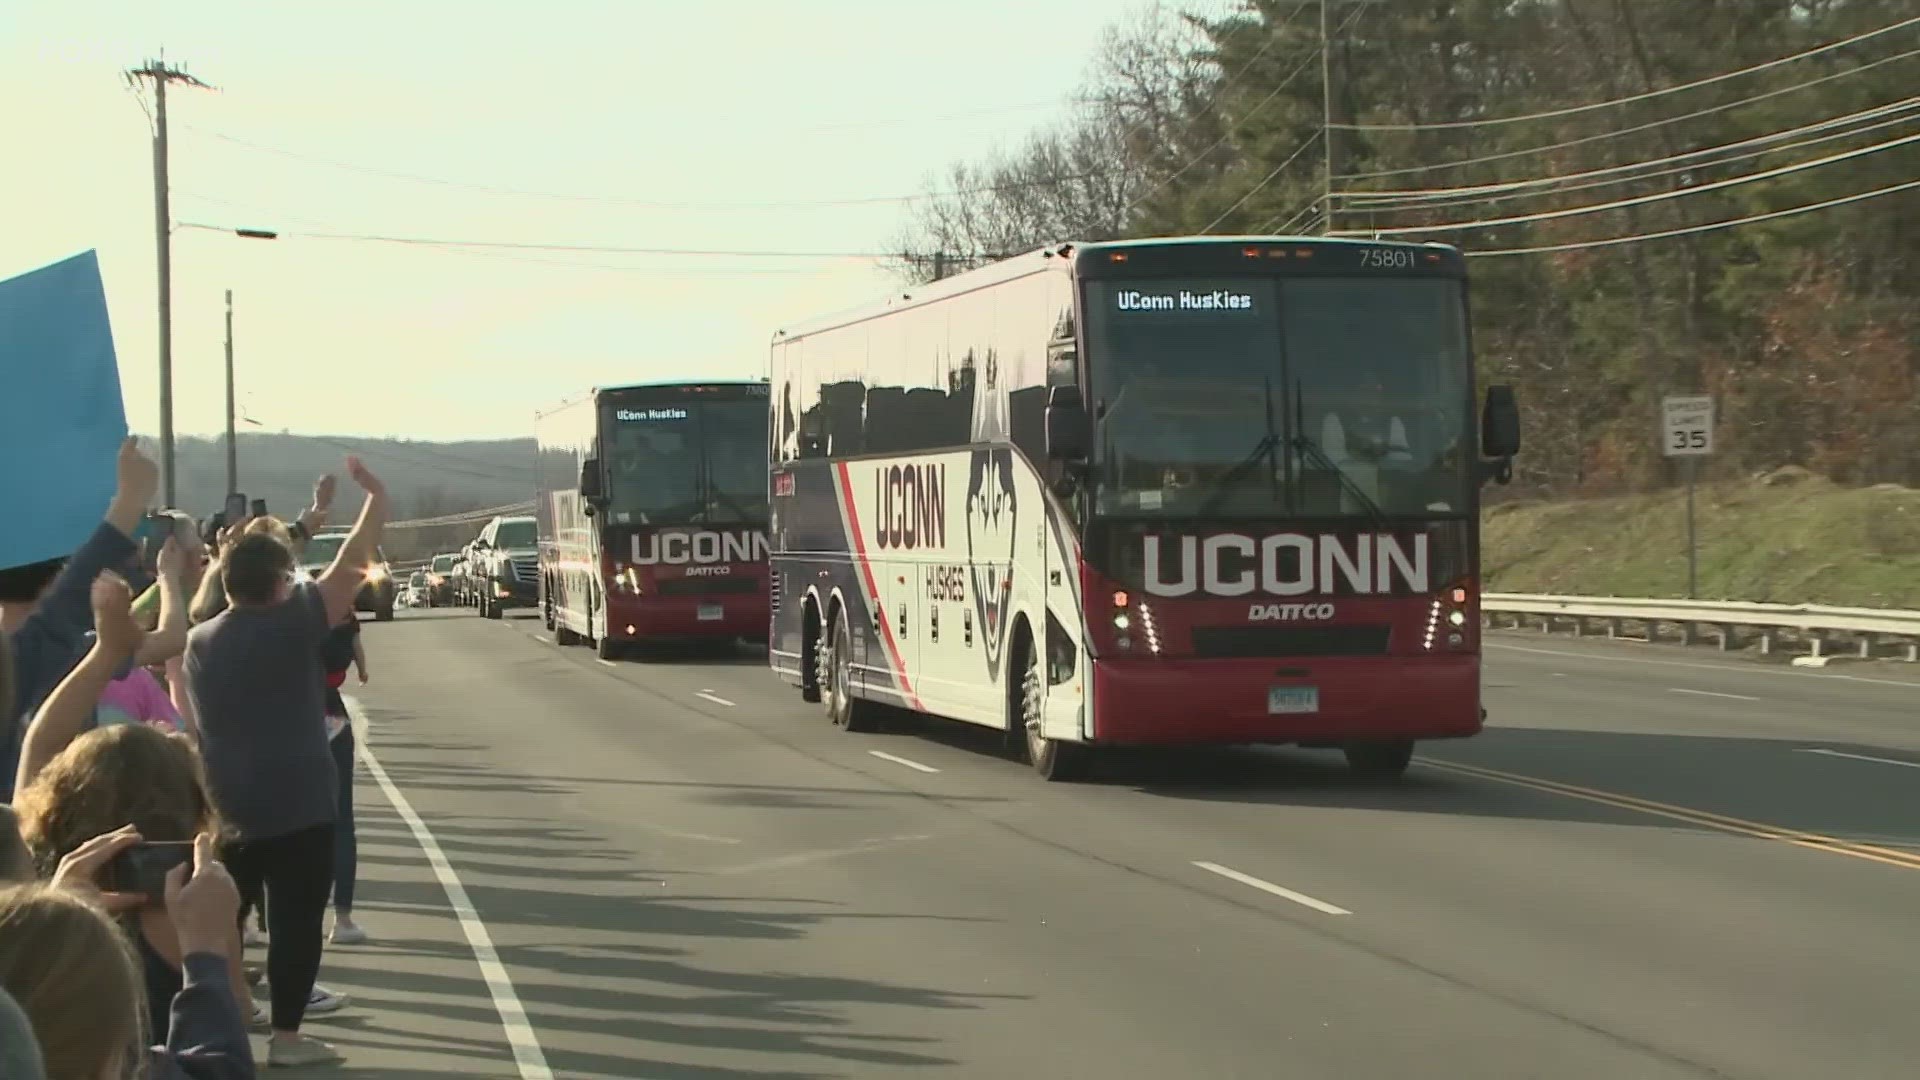 A parade for the UConn men's basketball team will be held in Hartford on Saturday, and students in Storrs are excited to continue the championship celebration.